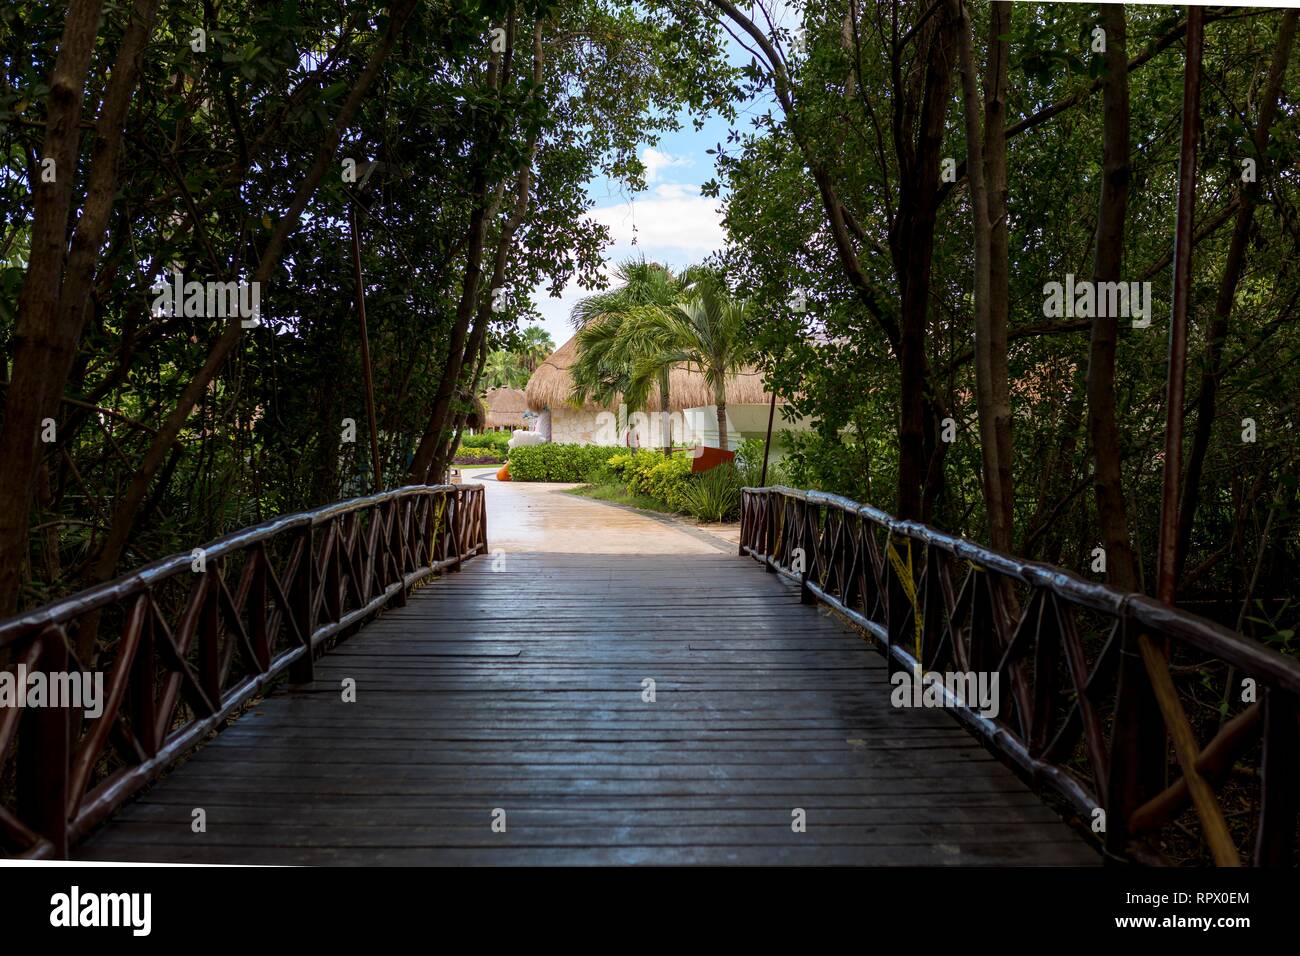 Rustic wooden bridge walk way shaded and silhouetted by trees and jungle down luxury Caribbean beach resort on the Riviera Maya in the Caribbean. Stock Photo